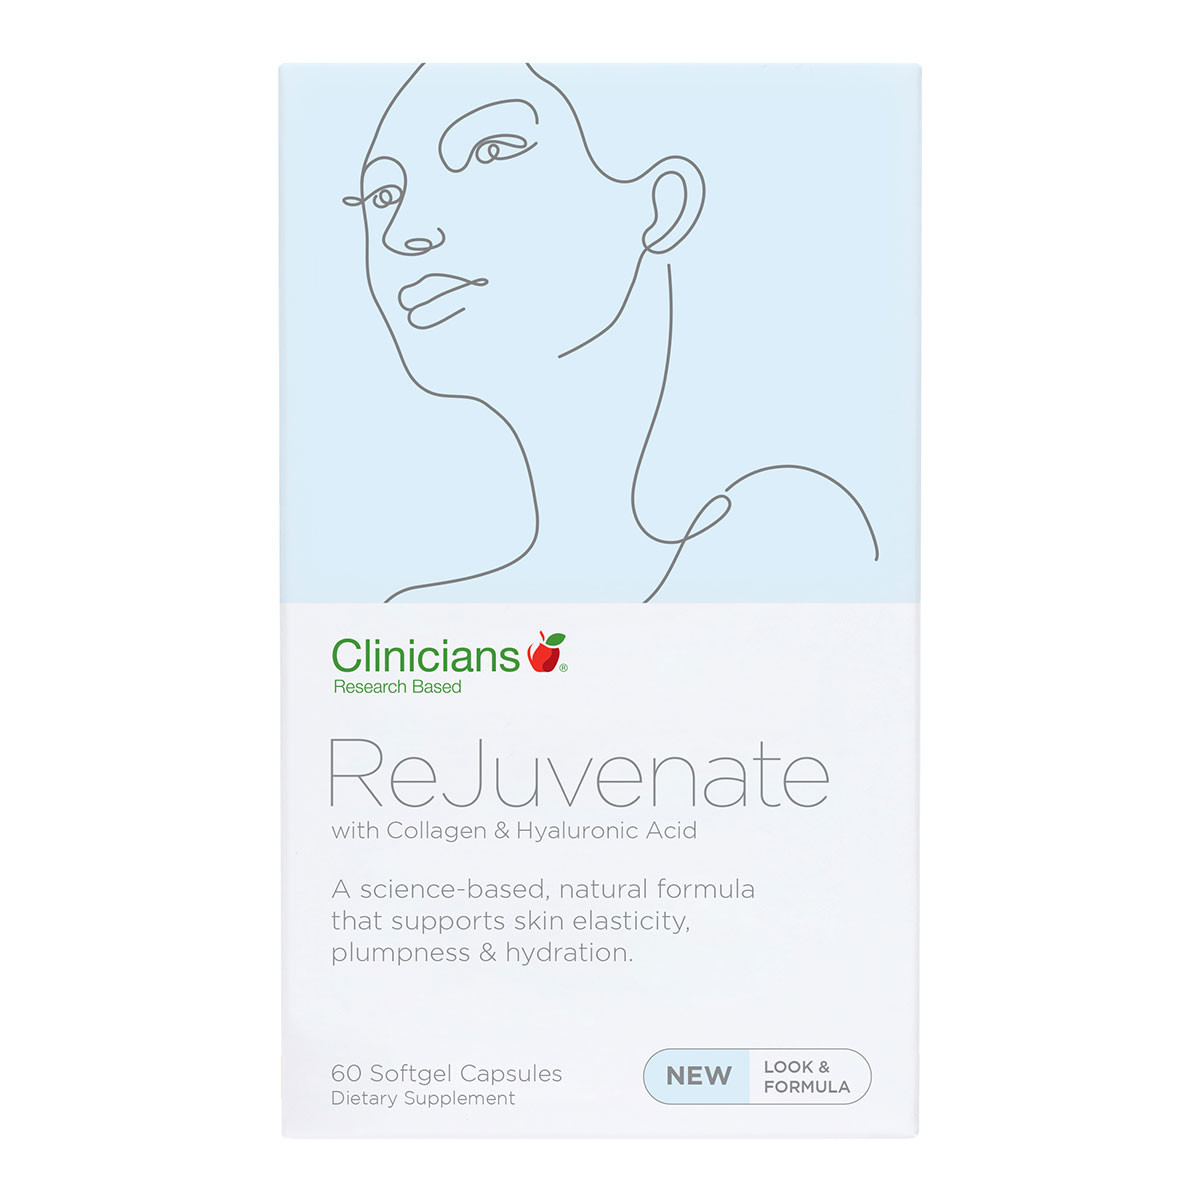 Clinicians Rejuvenate with Collagen and Hyaluronic Acid